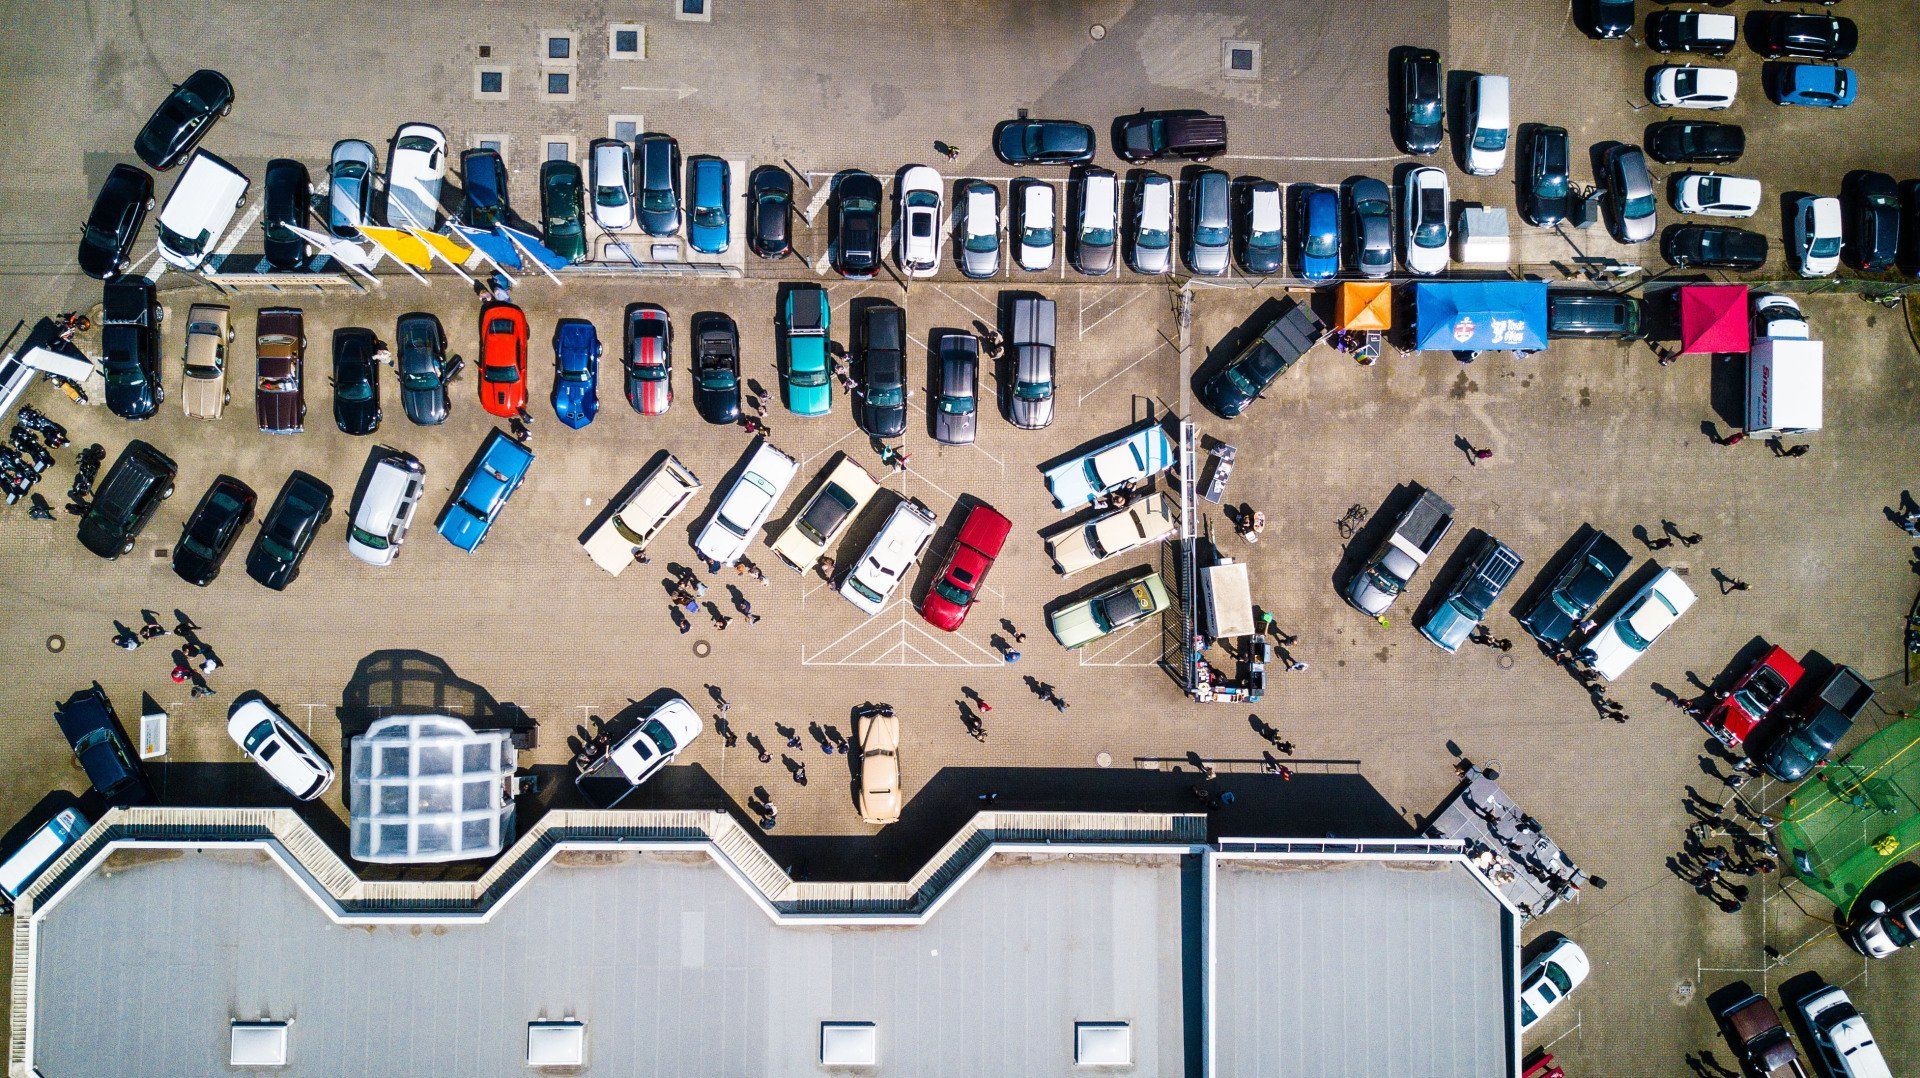 Top down shot of a parking lot with cars and people in it.